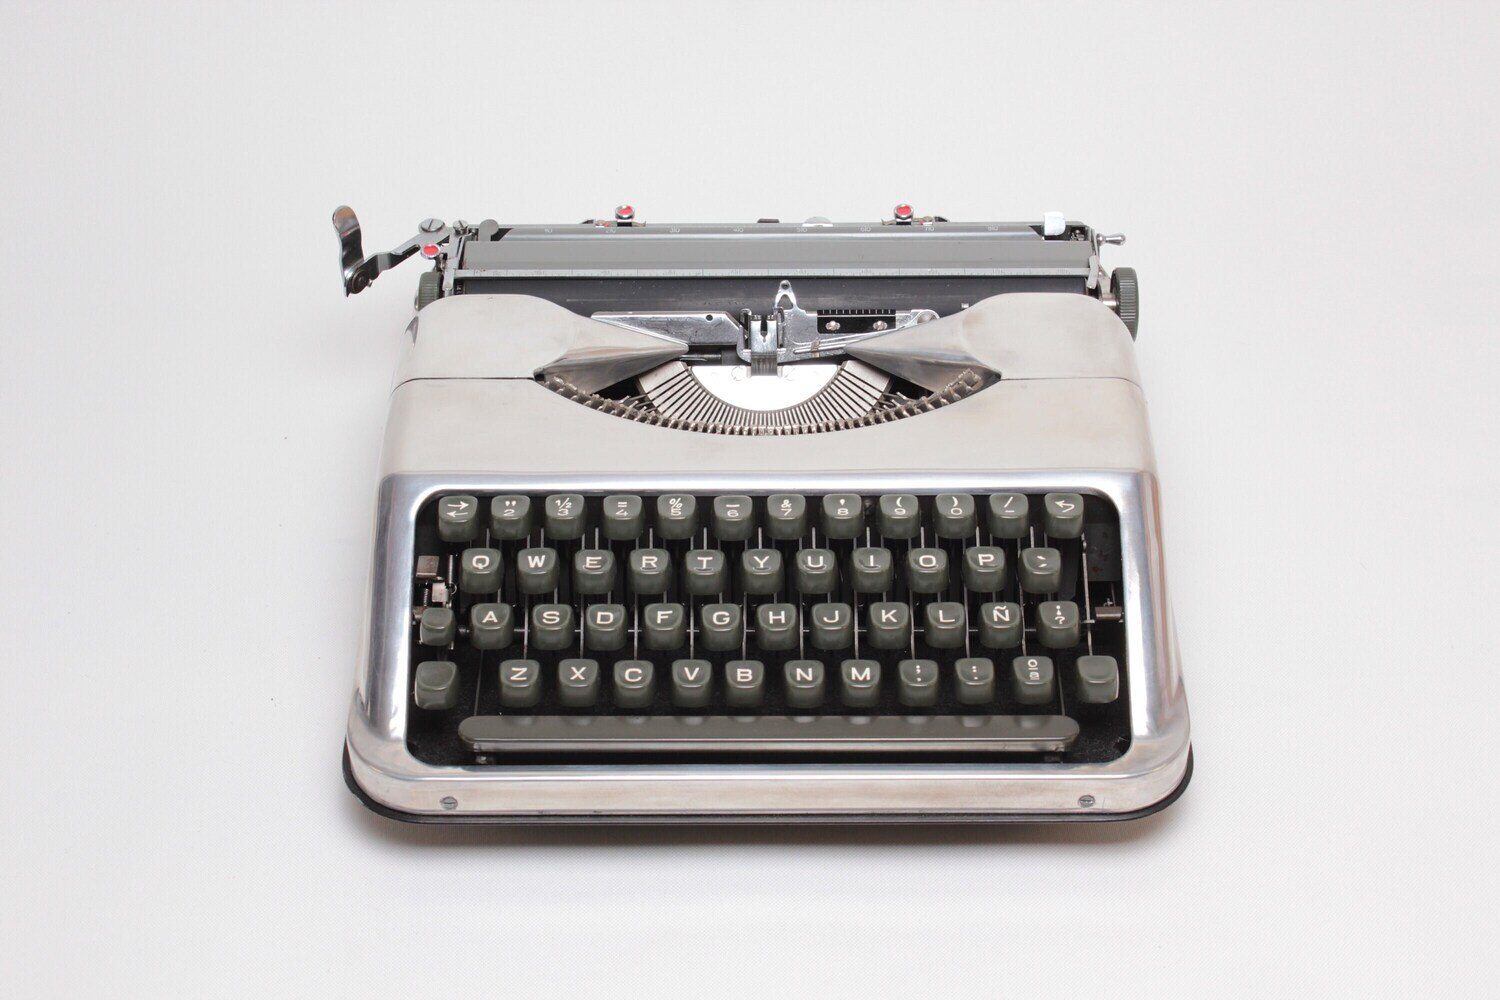 Limited Edition Hermes Baby Polished Silver Typewriter, Vintage, Manual Portable, Professionally Serviced by Typewriter.Company